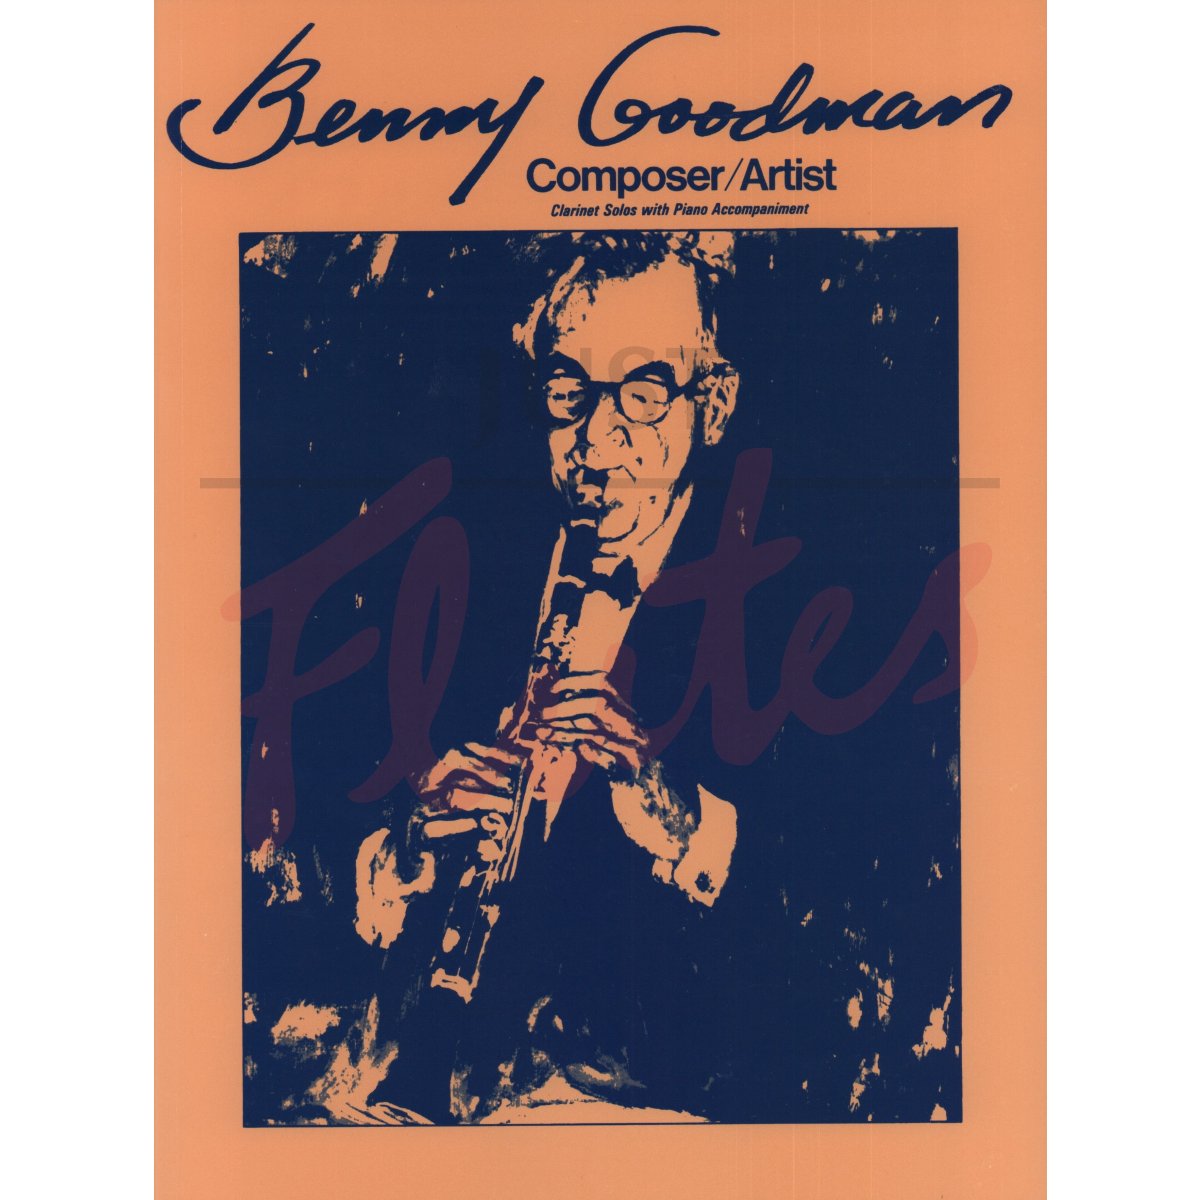 Benny Goodman: Composer/Artist - Clarinet Solos with Piano Accompaniment